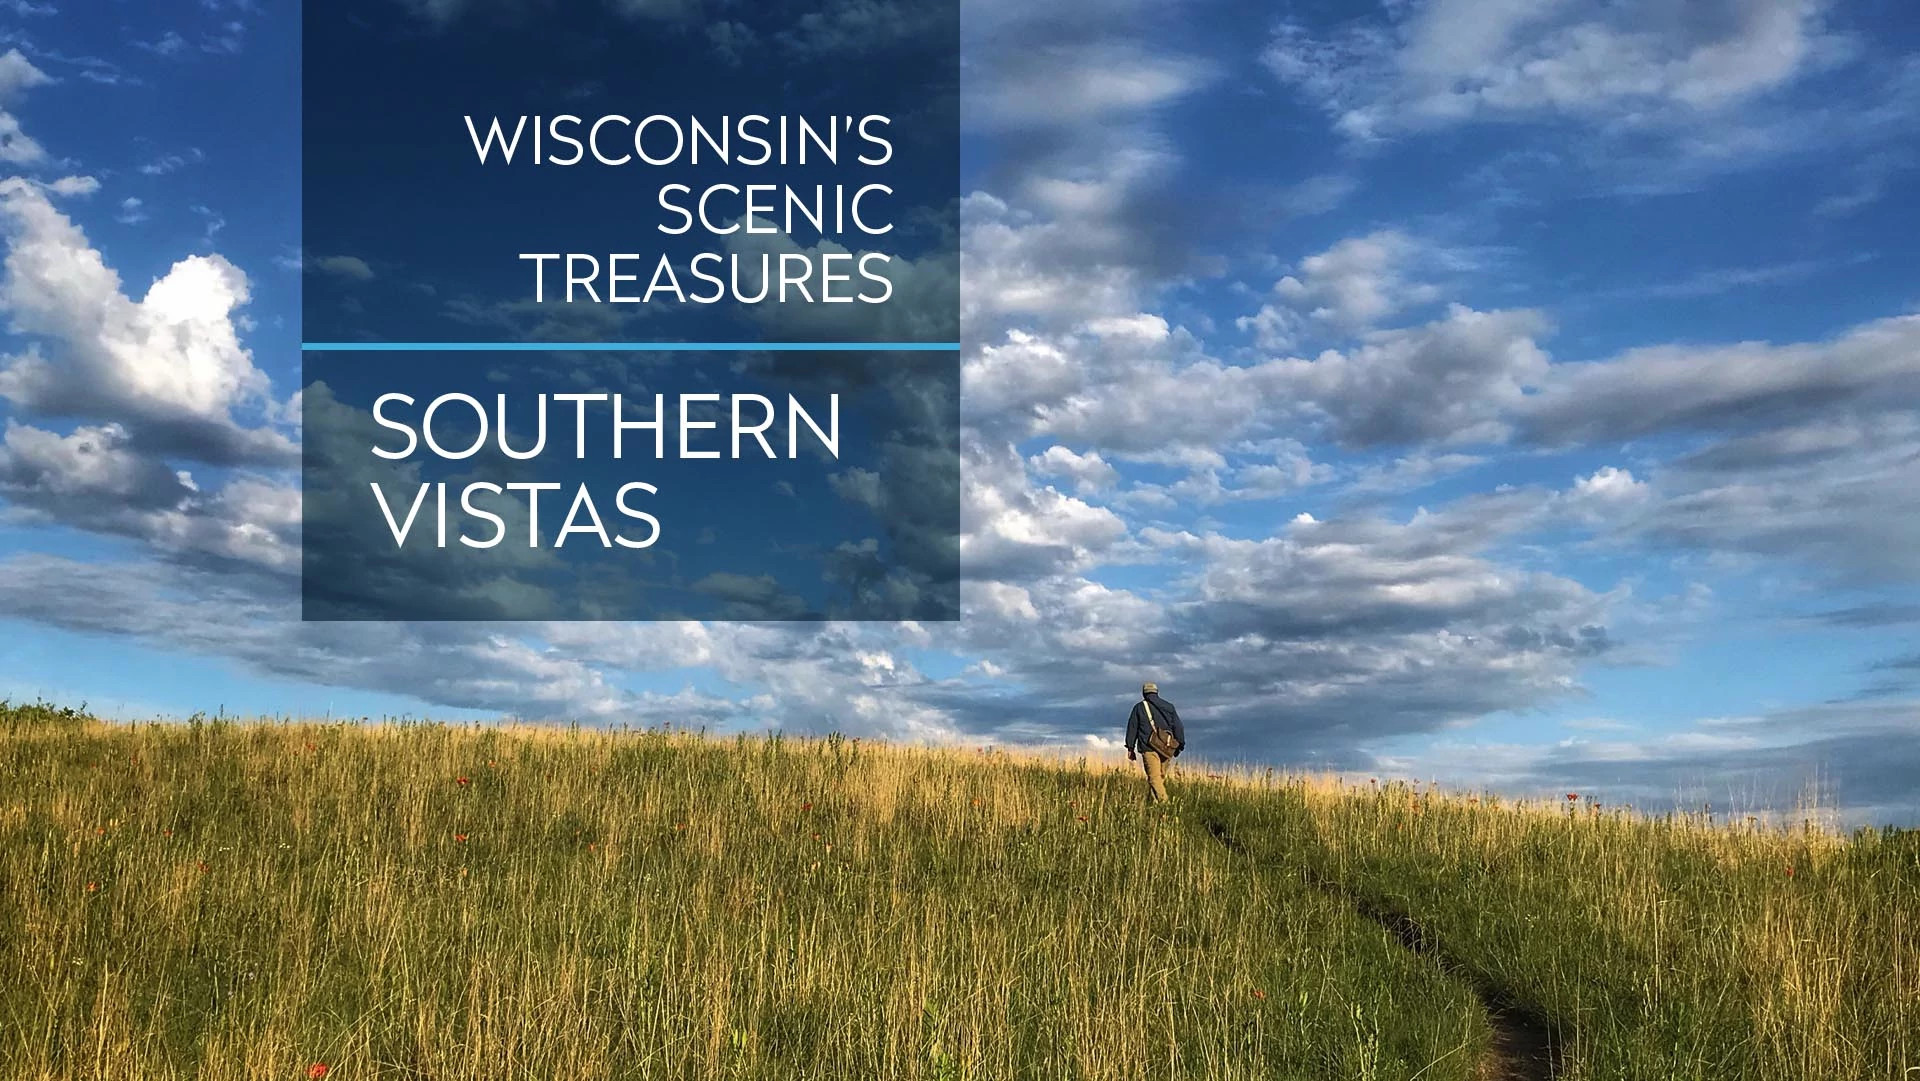 Photo of scenic view of a hill at a state natural area with text "Wisconsin's Scenic Treasures: Southern Vistas."